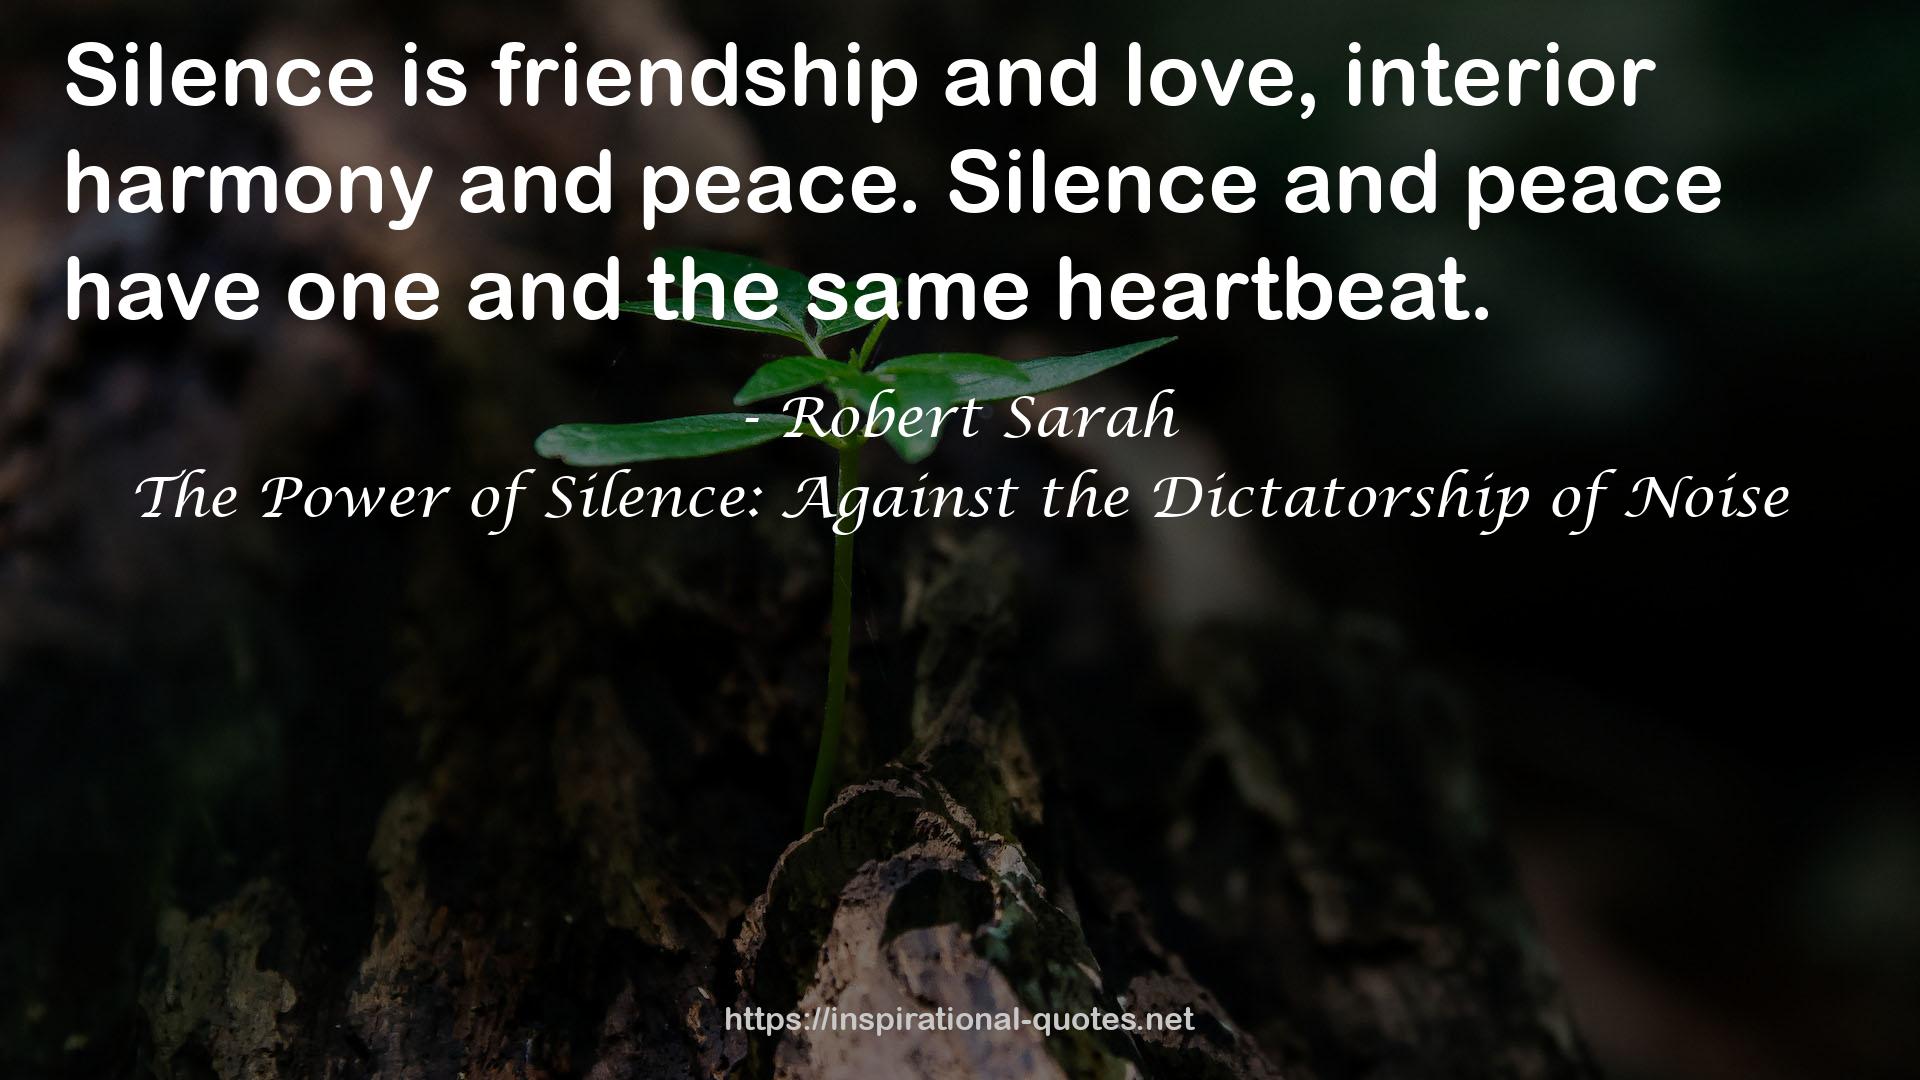 The Power of Silence: Against the Dictatorship of Noise QUOTES